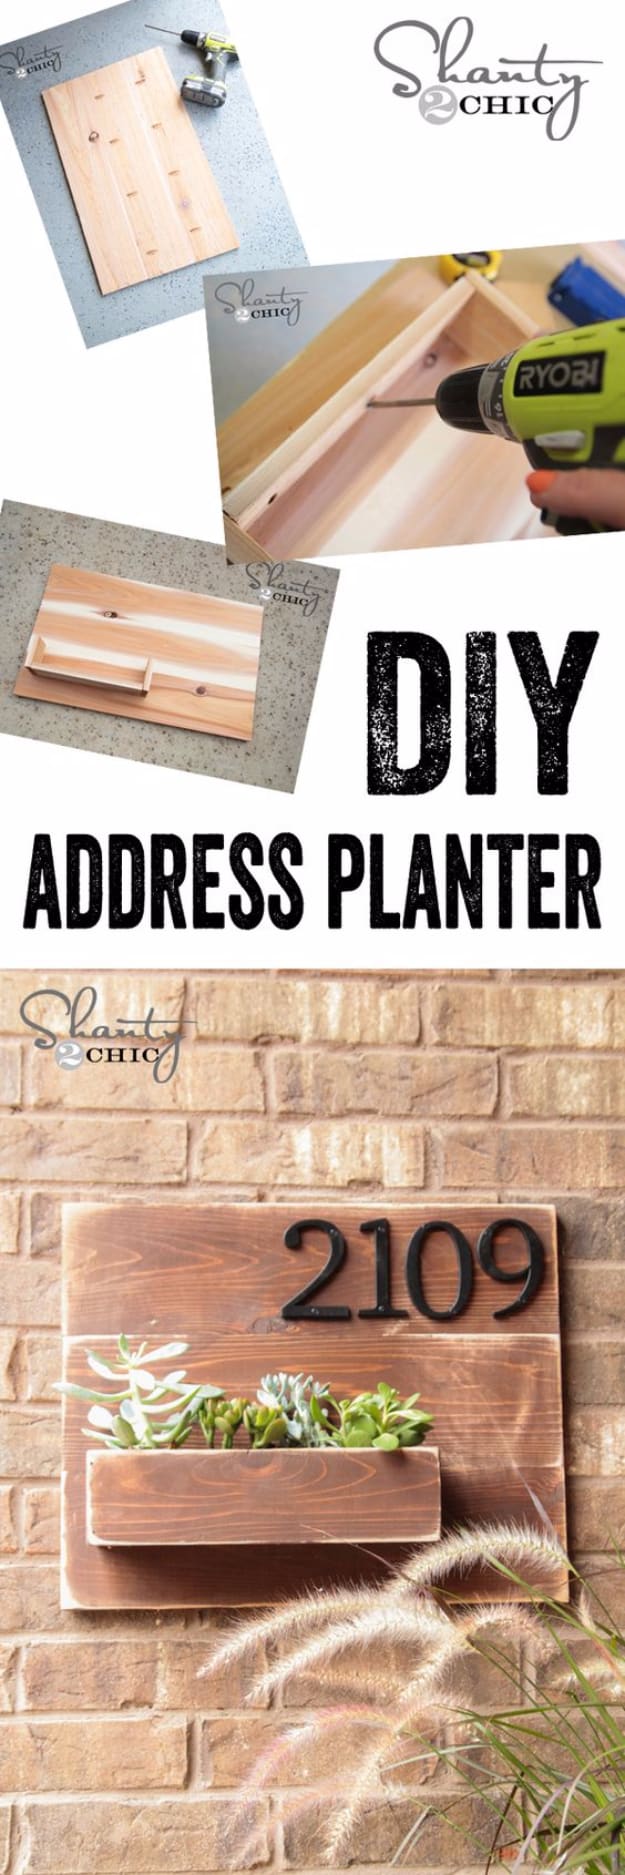 Creative Ways to Increase Curb Appeal on A Budget - DIY Address Number Wall Planter - Cheap and Easy Ideas for Upgrading Your Front Porch, Landscaping, Driveways, Garage Doors, Brick and Home Exteriors. Add Window Boxes, House Numbers, Mailboxes and Yard Makeovers http://diyjoy.com/diy-curb-appeal-ideas